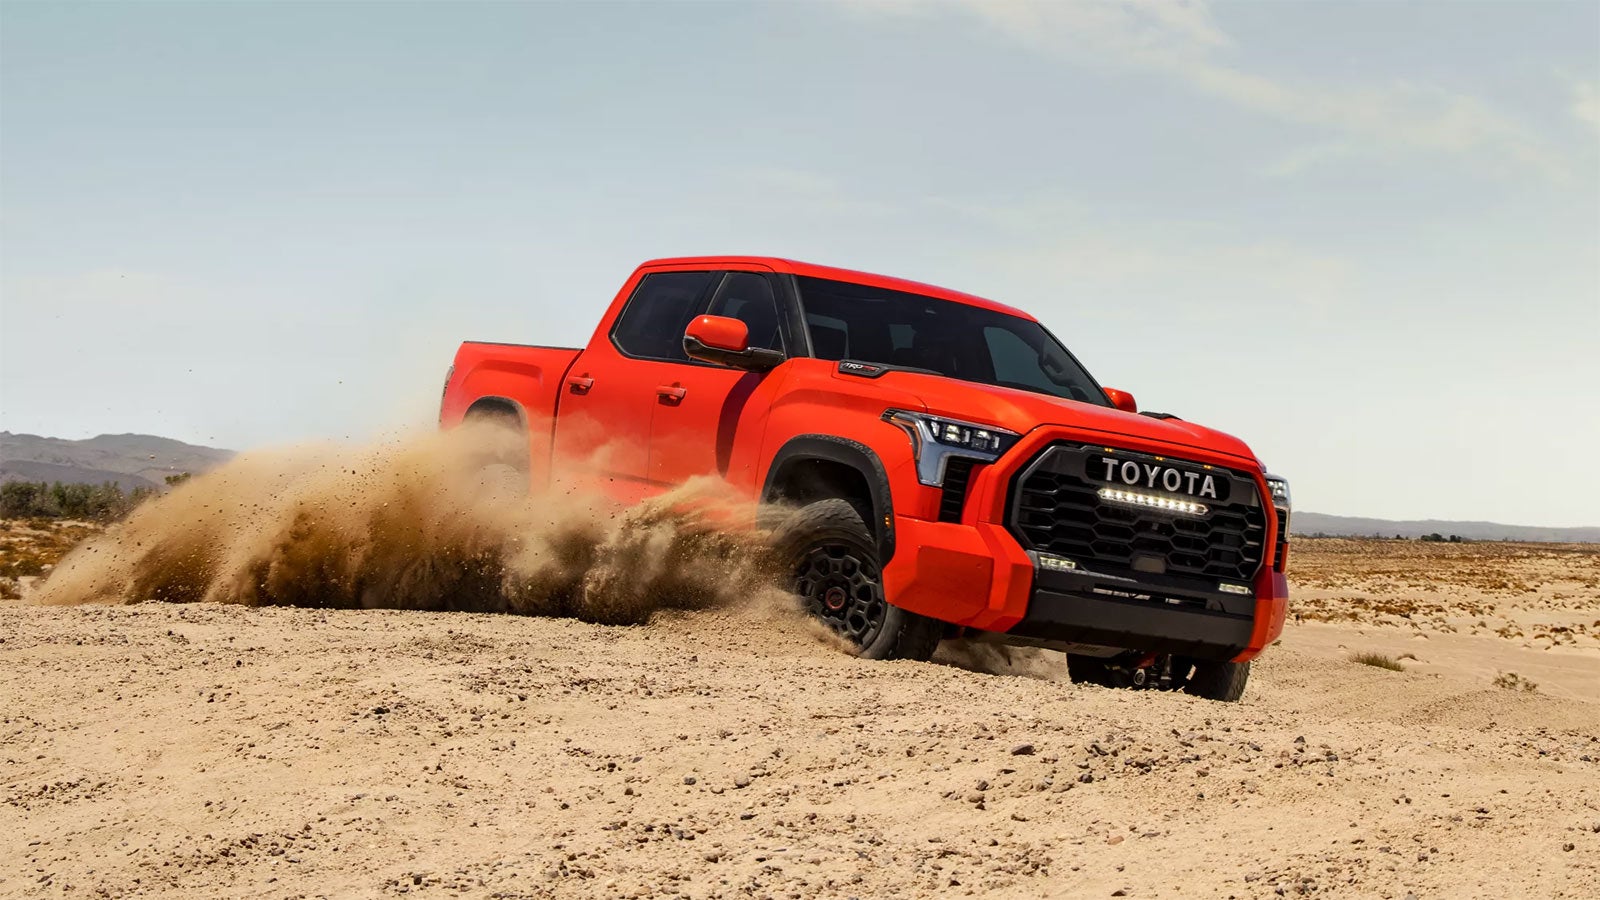 2022 Toyota Tundra Gallery | Ardmore Toyota in Ardmore PA